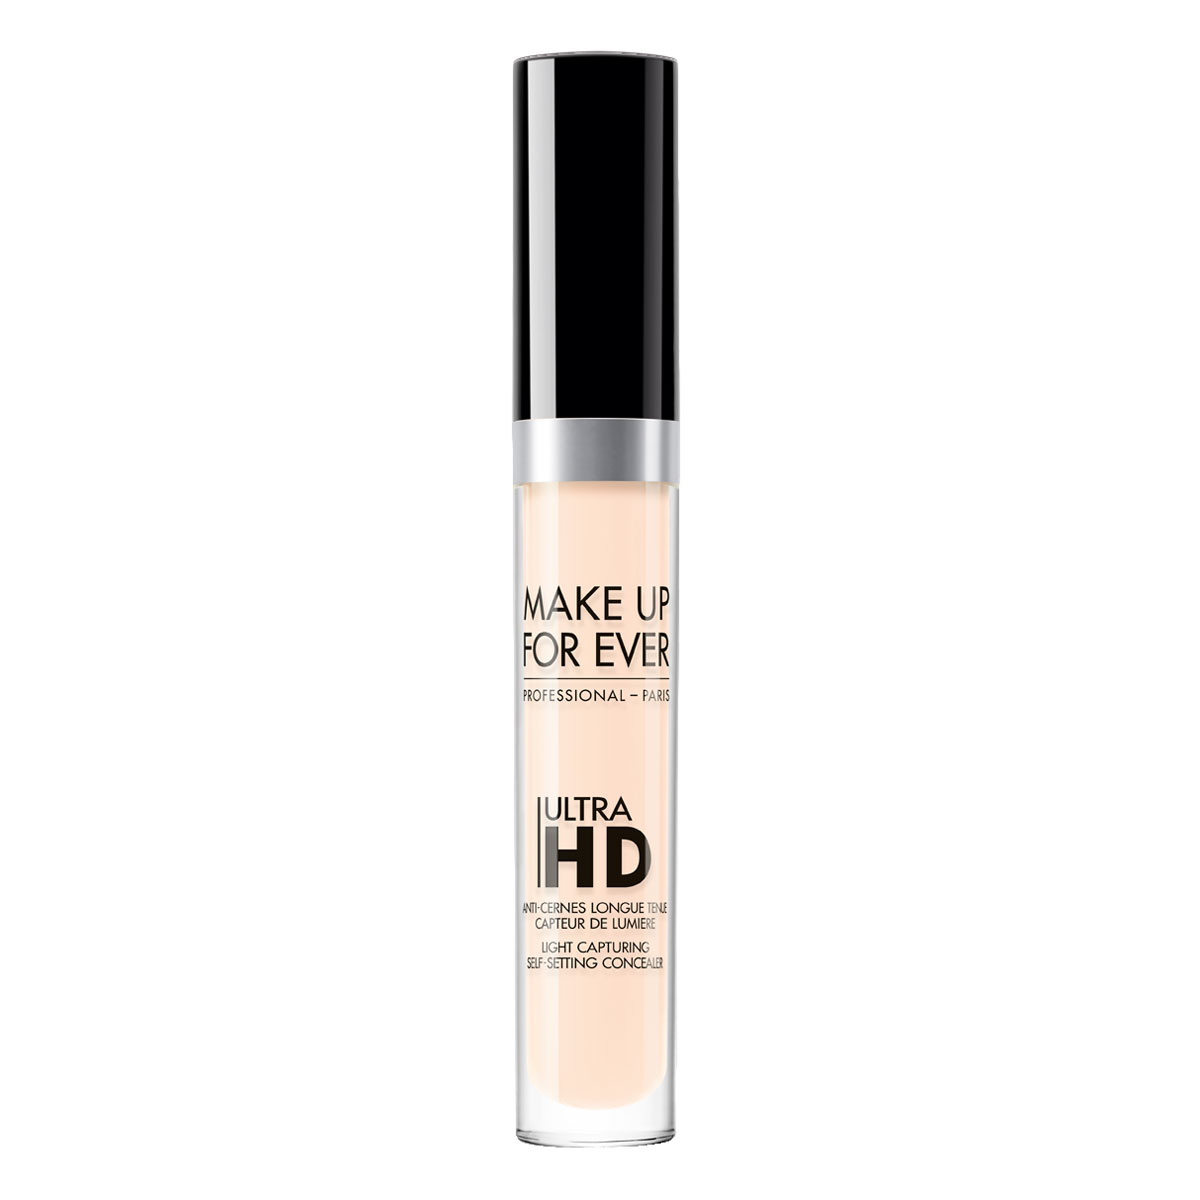 MAKE UP FOR EVER ULTRA HD SELF-SETTING CONCEALER 5ml